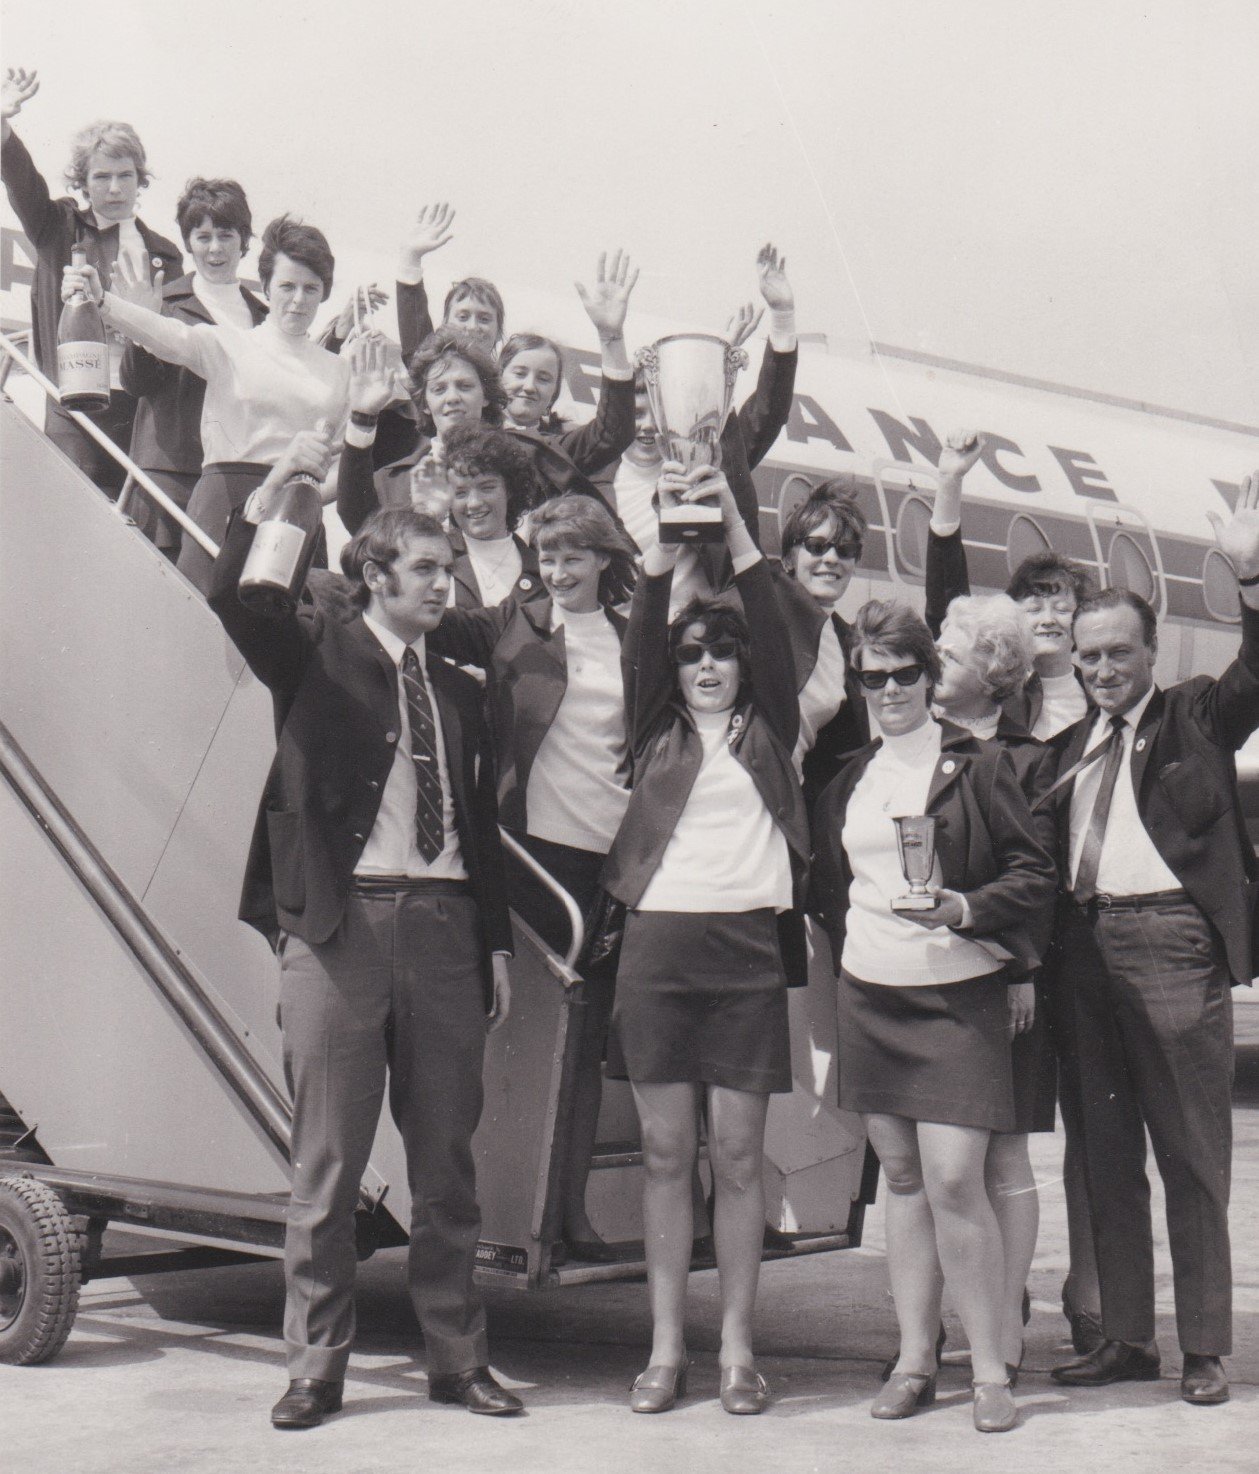 Manchester Corinthians returning from the Reims tournament with the trophy (photo courtesy of Margaret Shepherd)